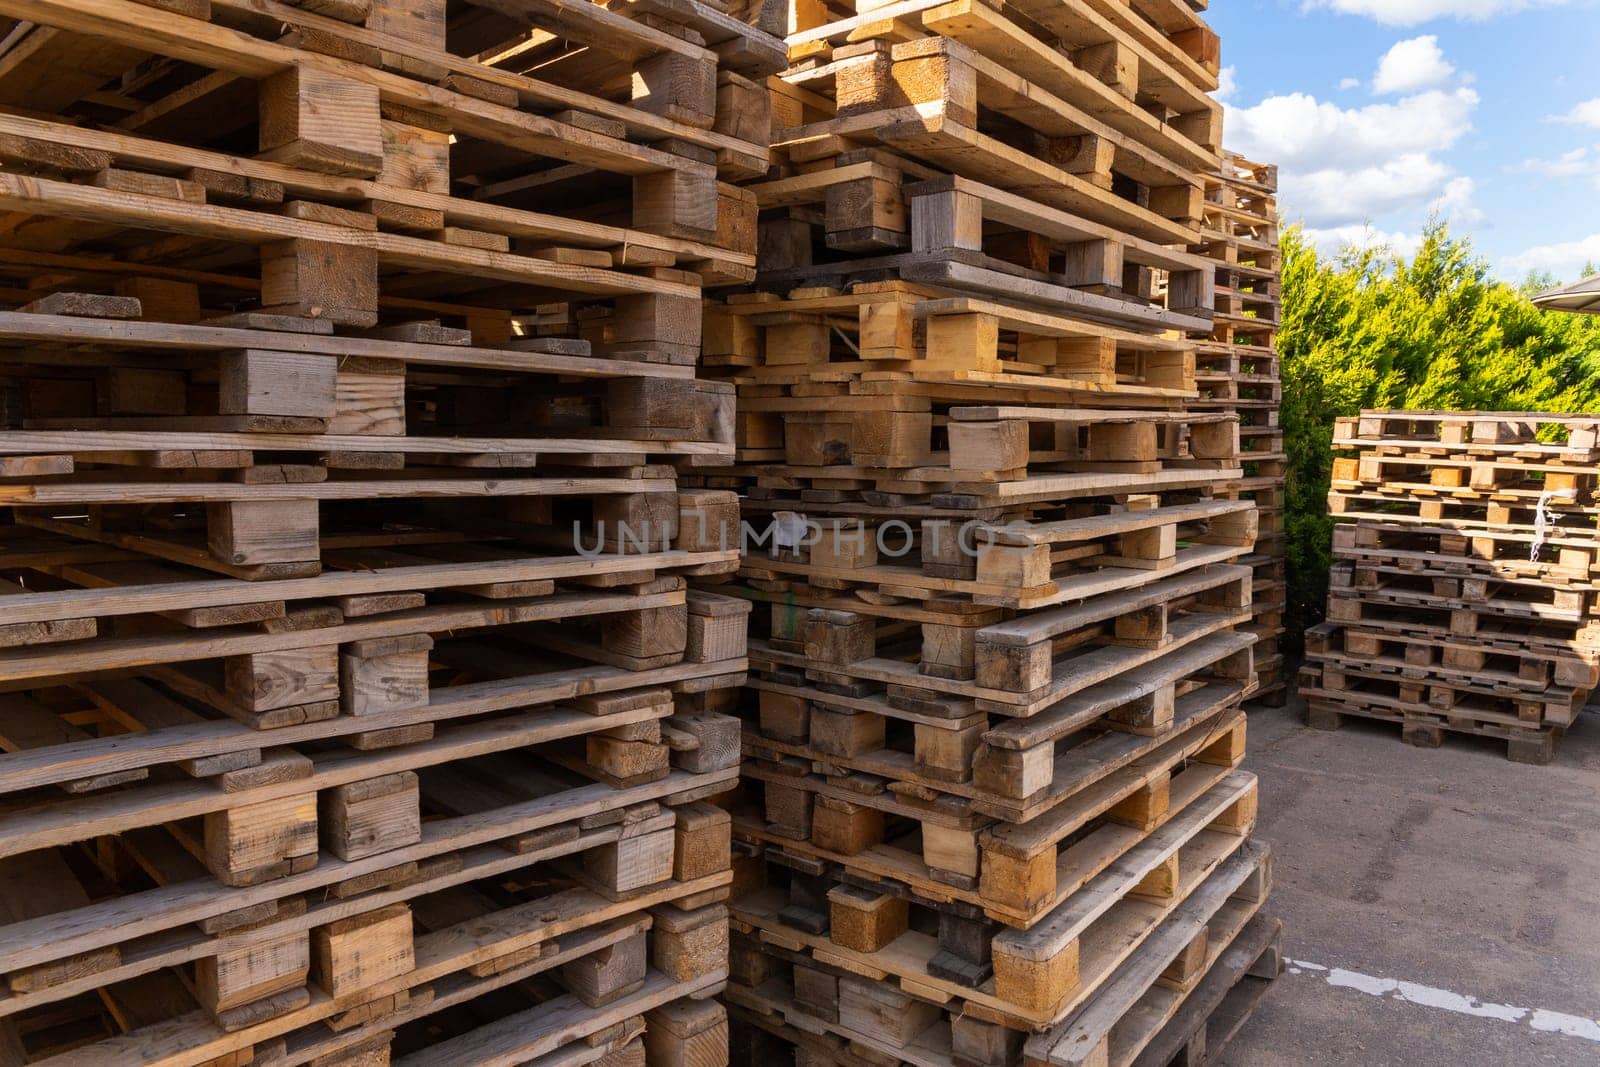 Piles of stacked natural wooden shipping pallets. by BY-_-BY